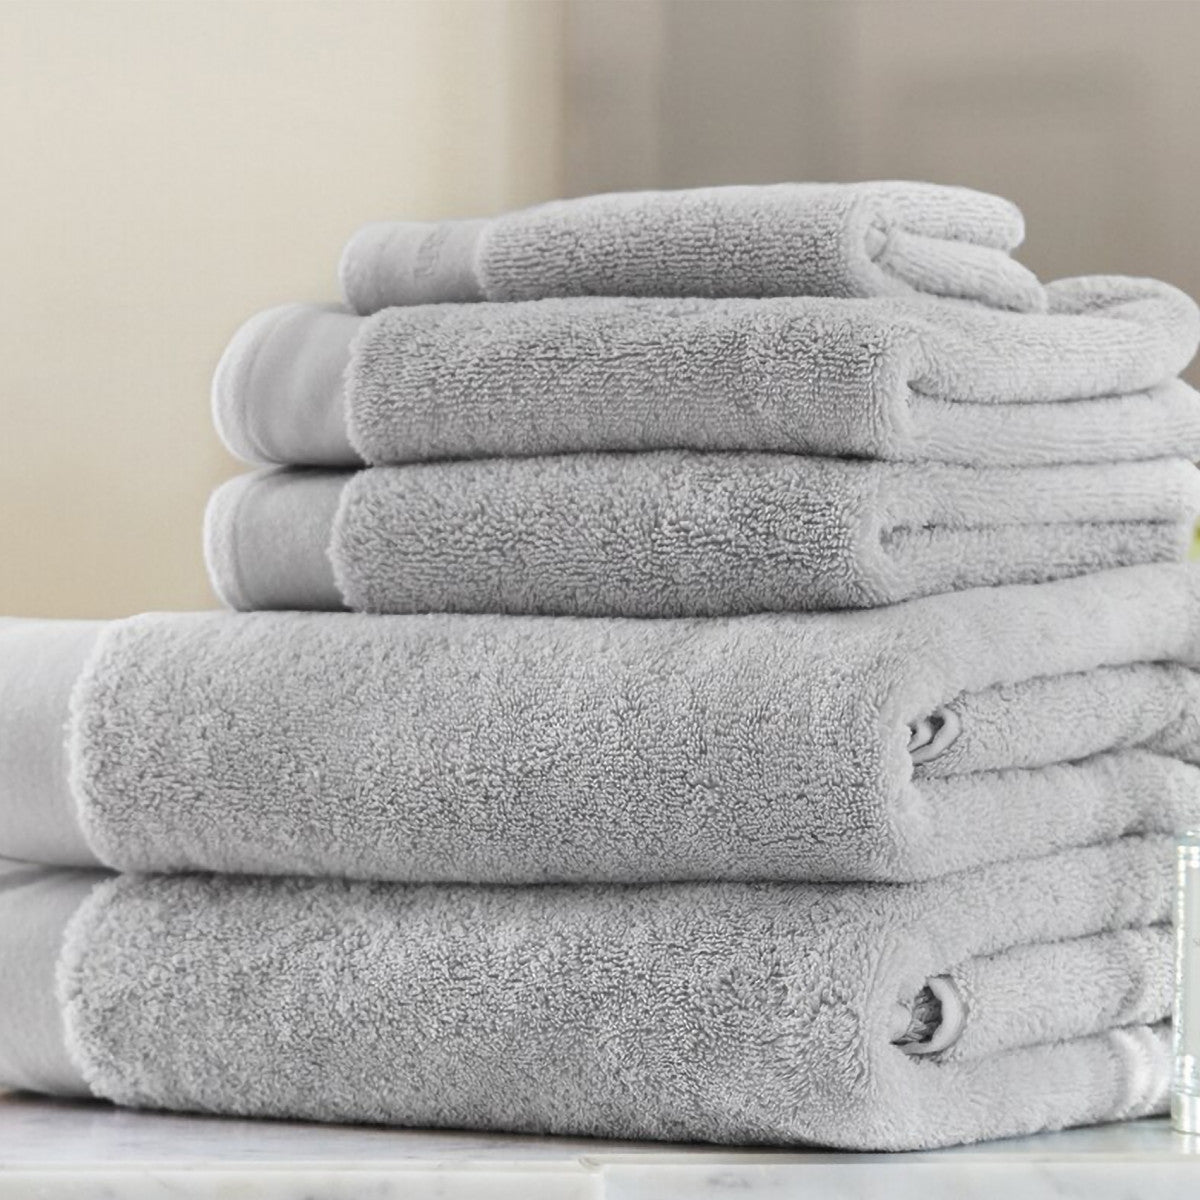 Luxury Retreat Vapour Towel Collection by Sheridan